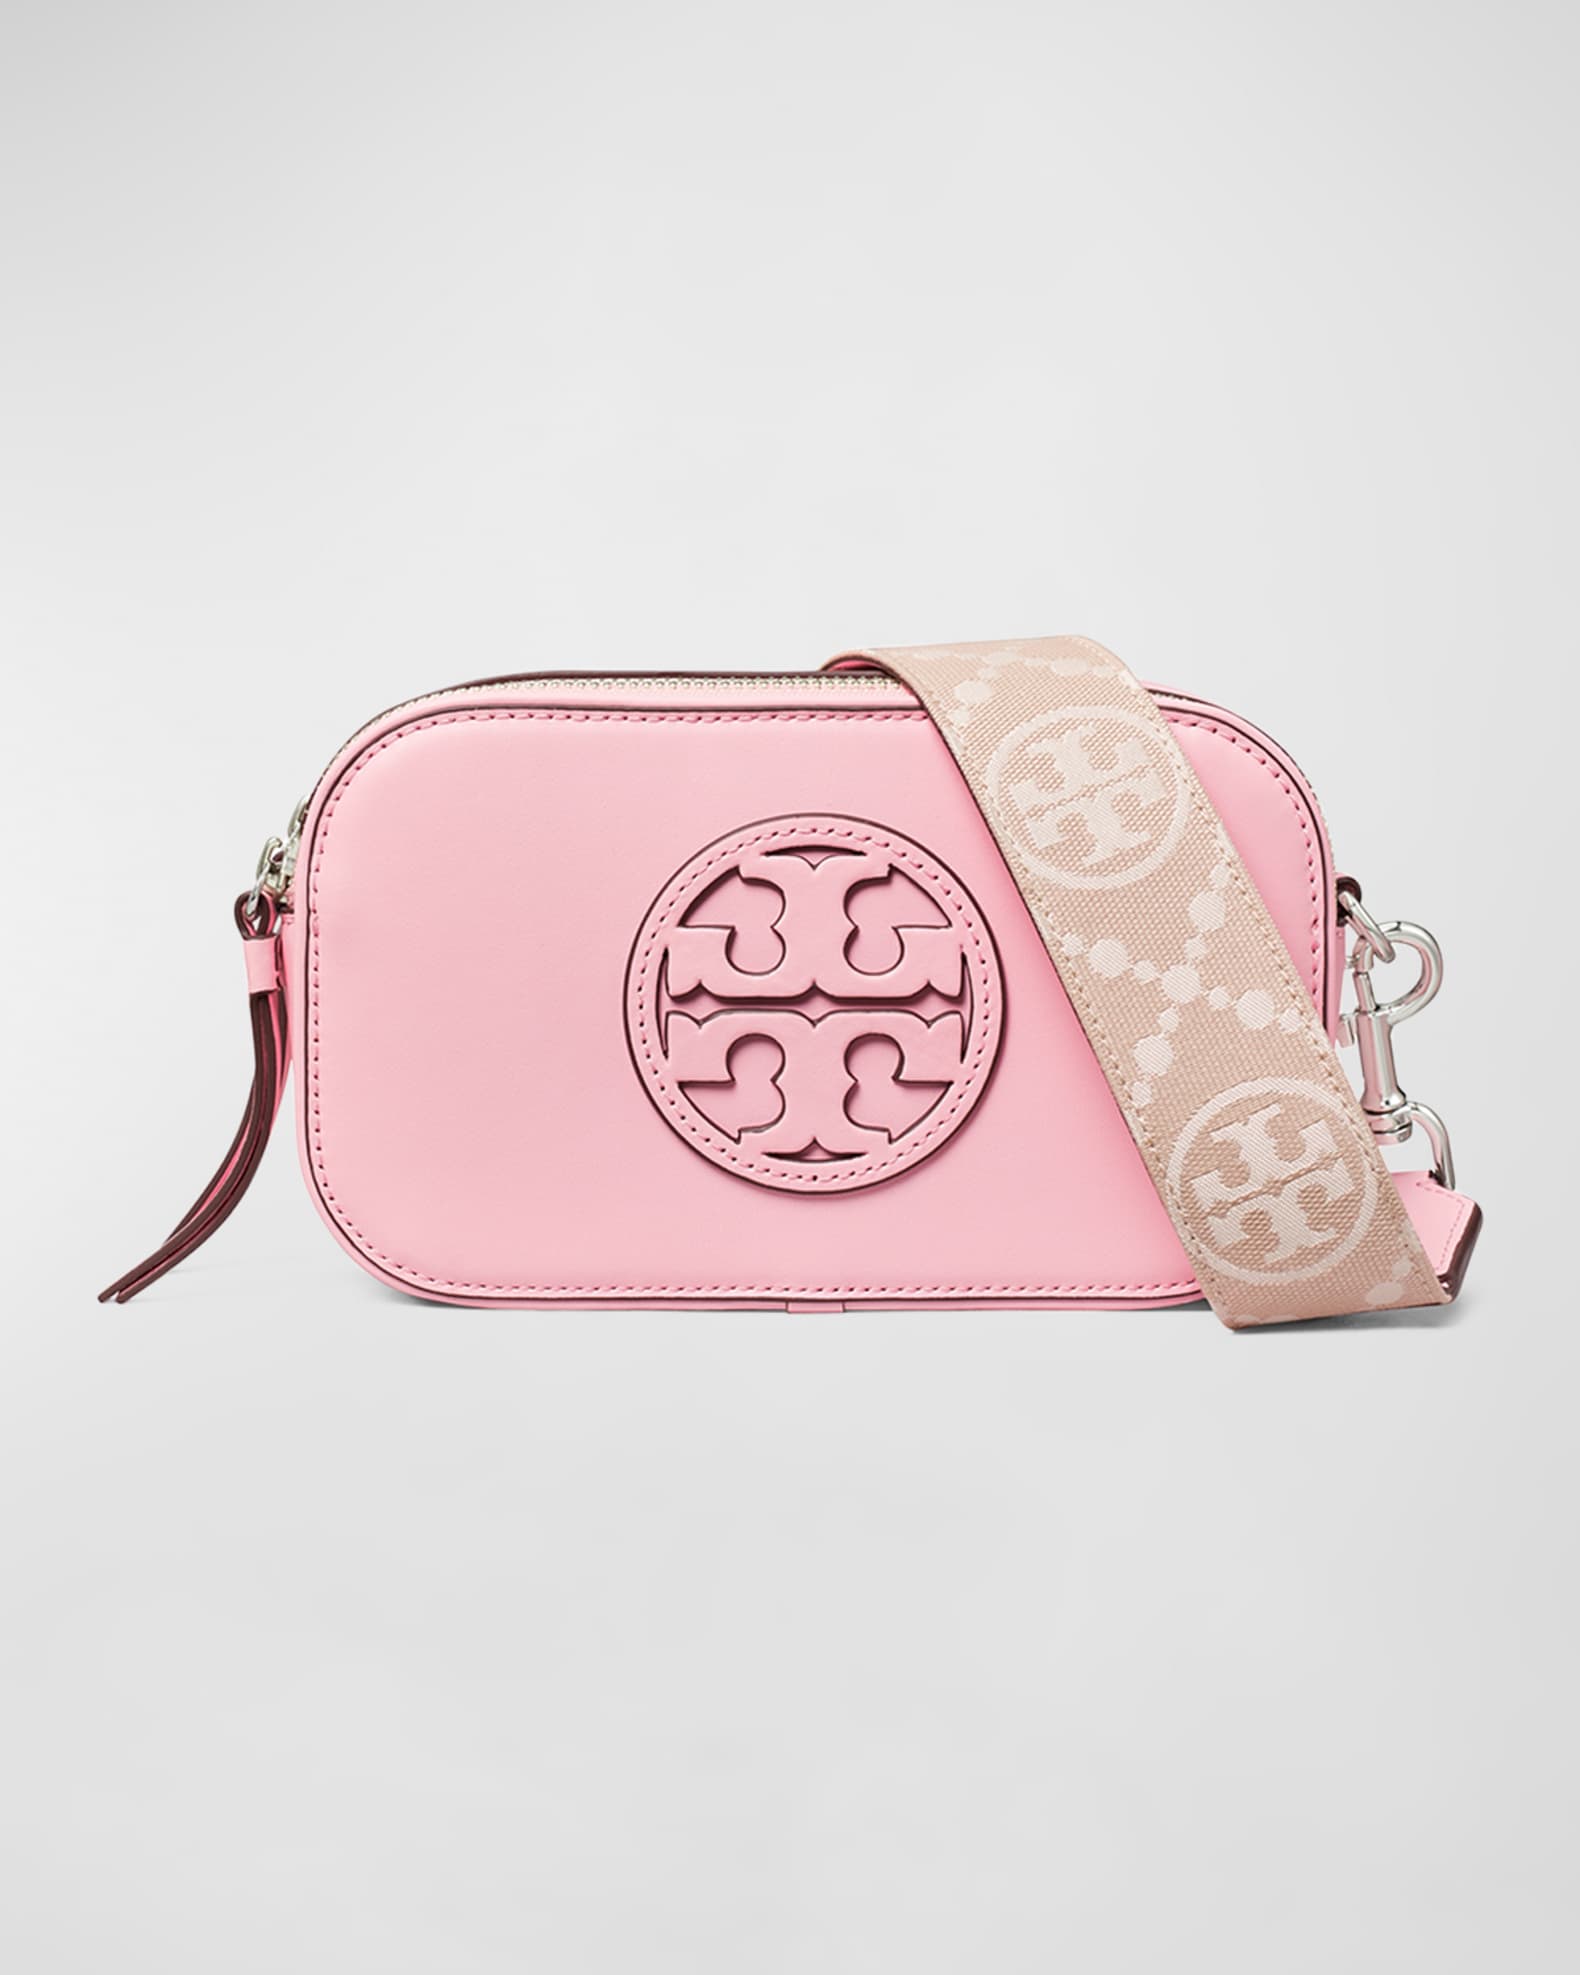 Previously owned Tory Burch Miller nano crossbody. Fits your cards